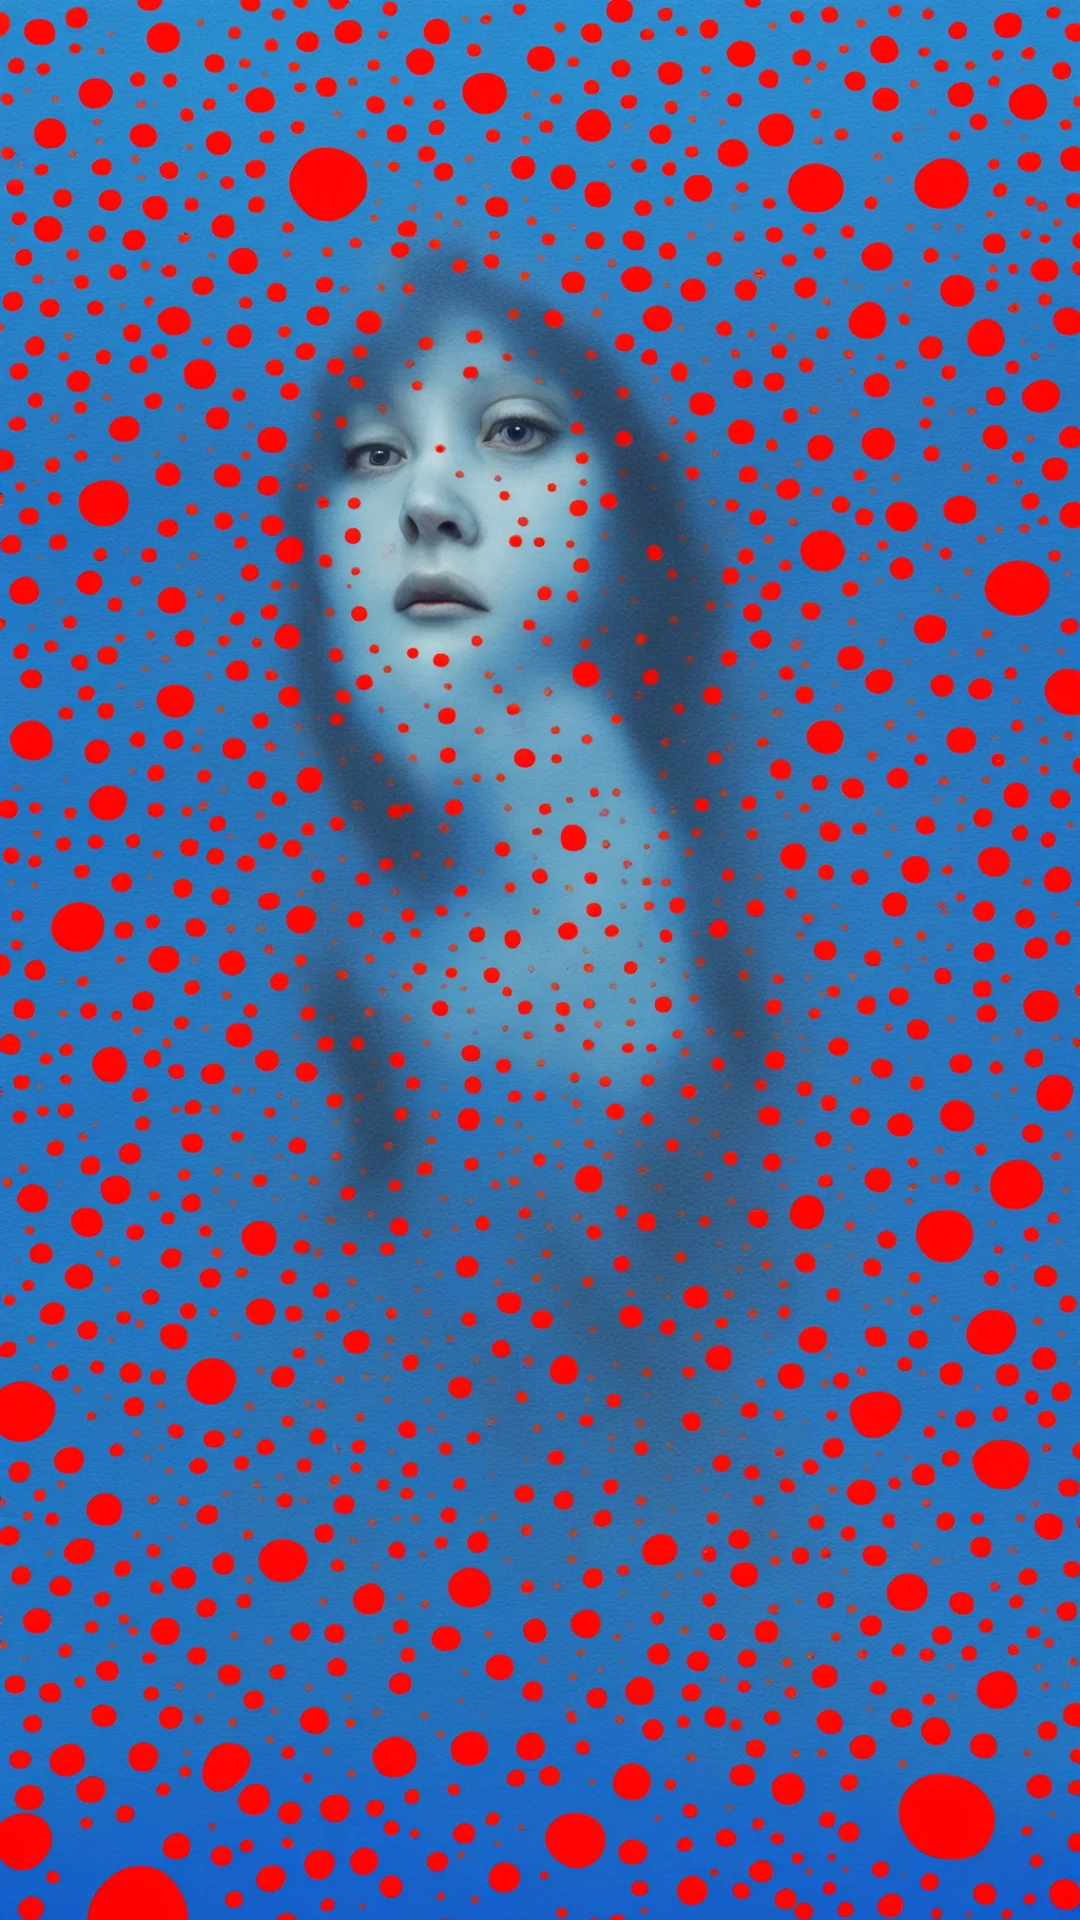 angst and distress in blue tones yayoi kusama style amazing awesome portrait 2 tall